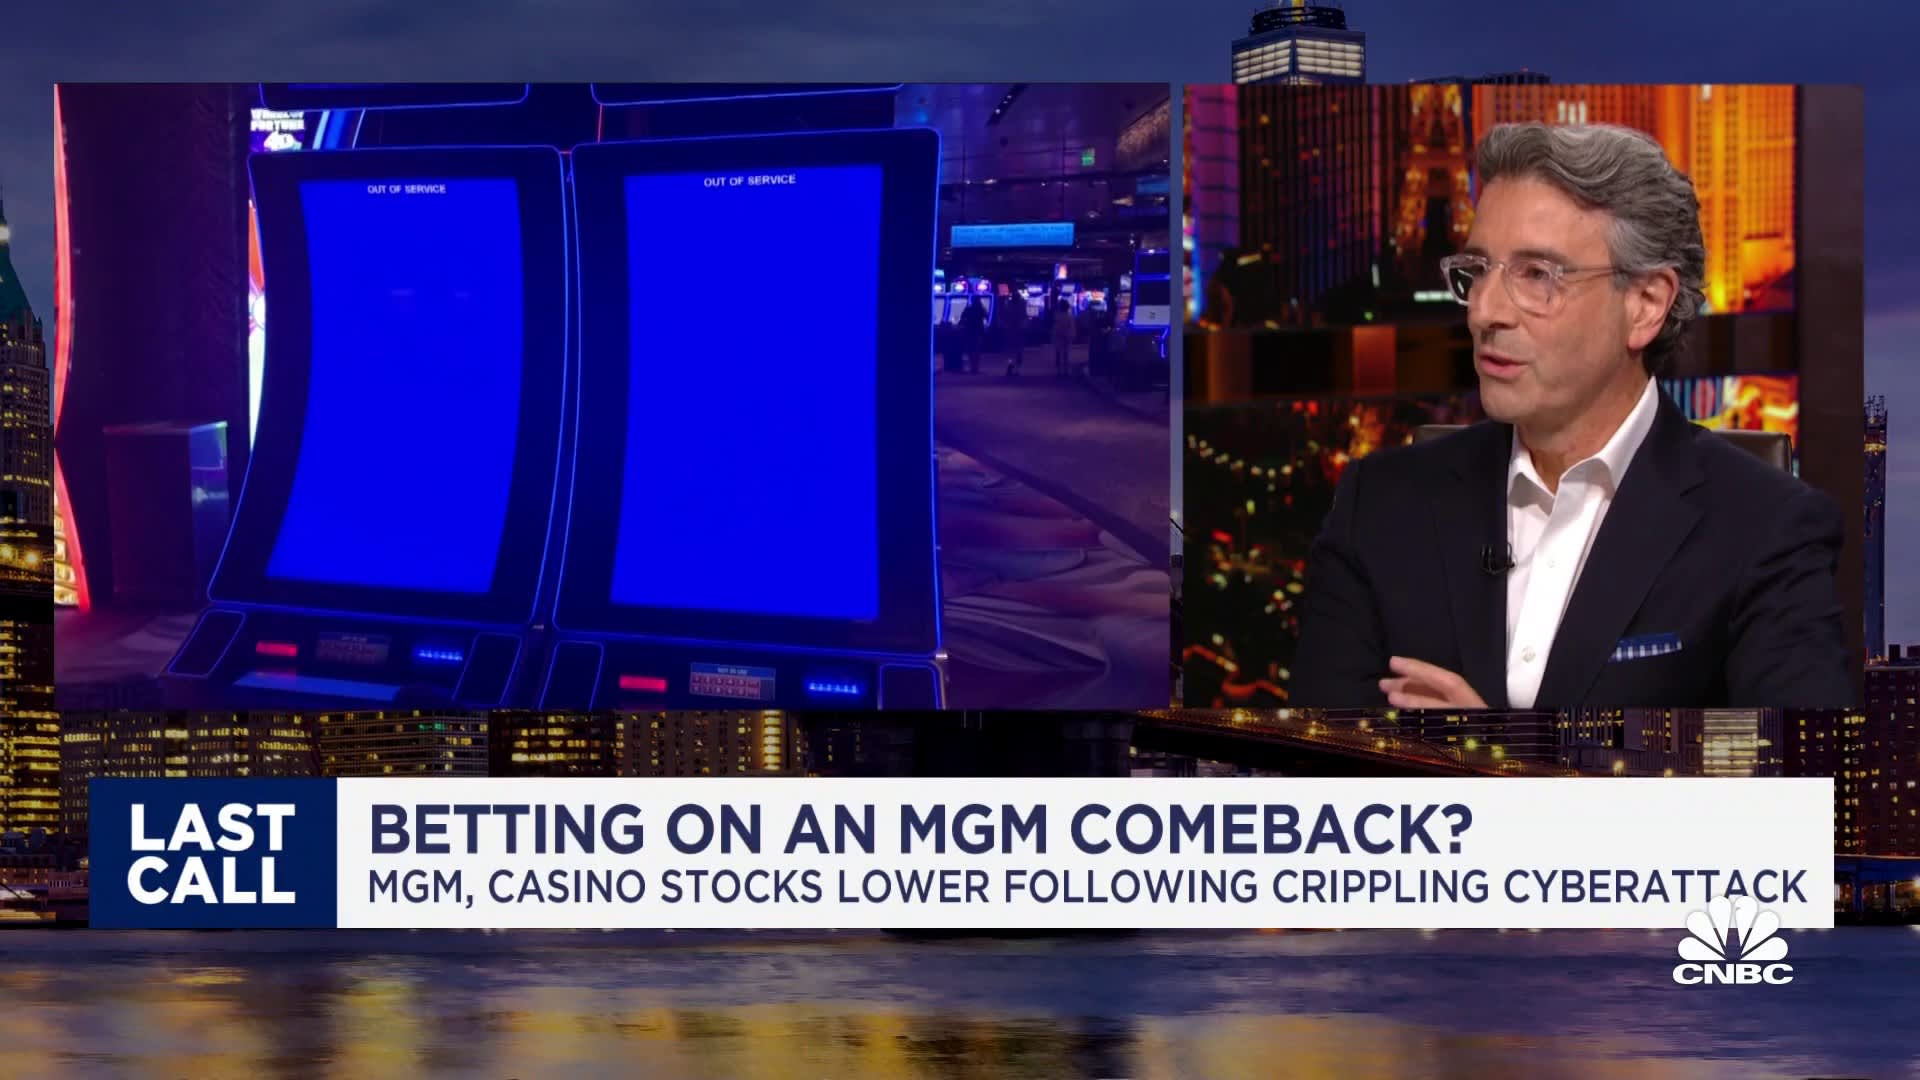 You nonetheless can not book a room on MGM’s web site following cyberattack, suggests Jefferies’ David Katz